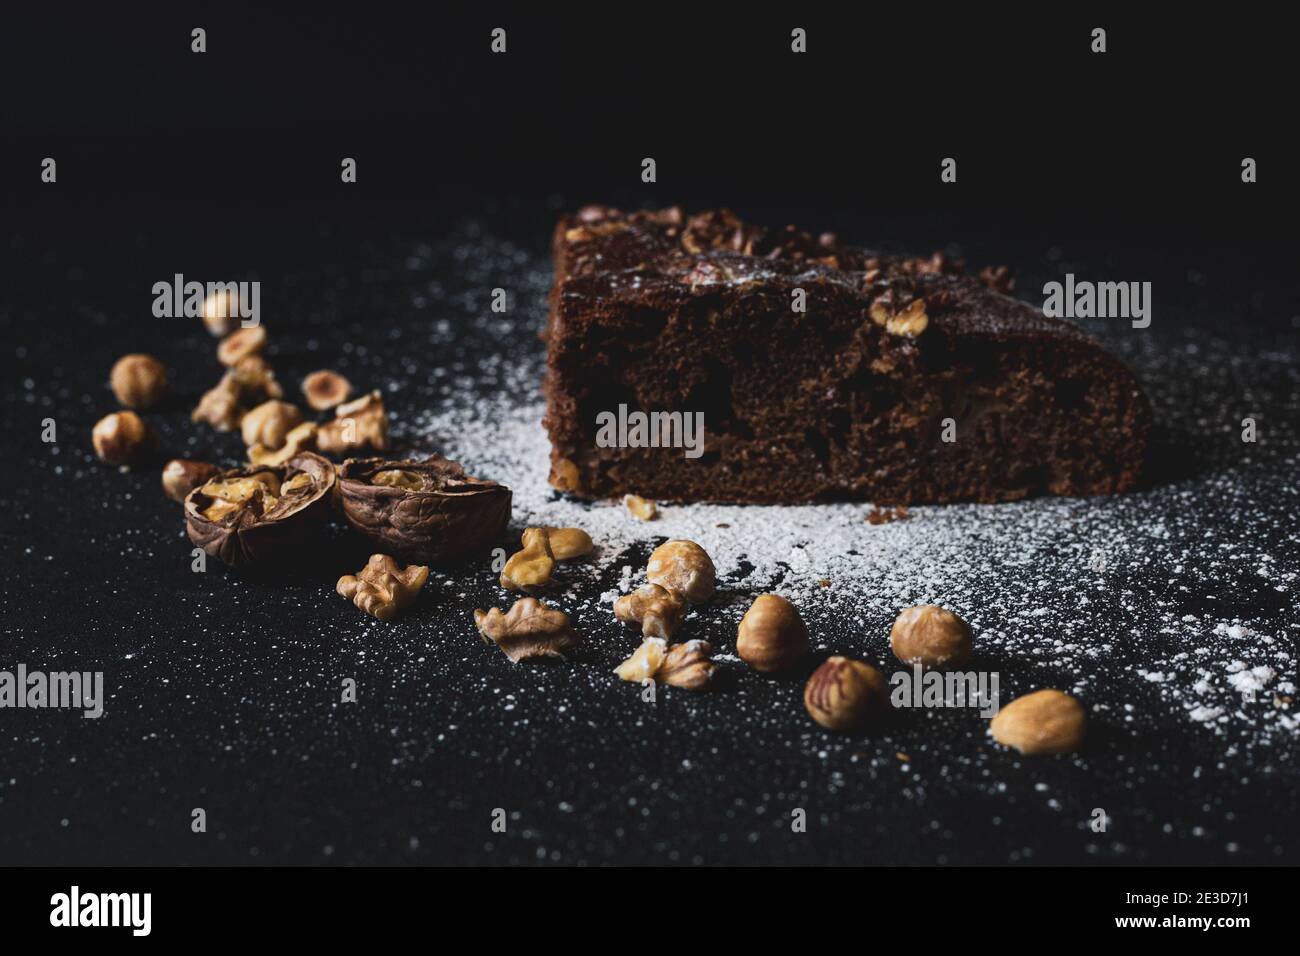 Chocolate cake with nuts Stock Photo